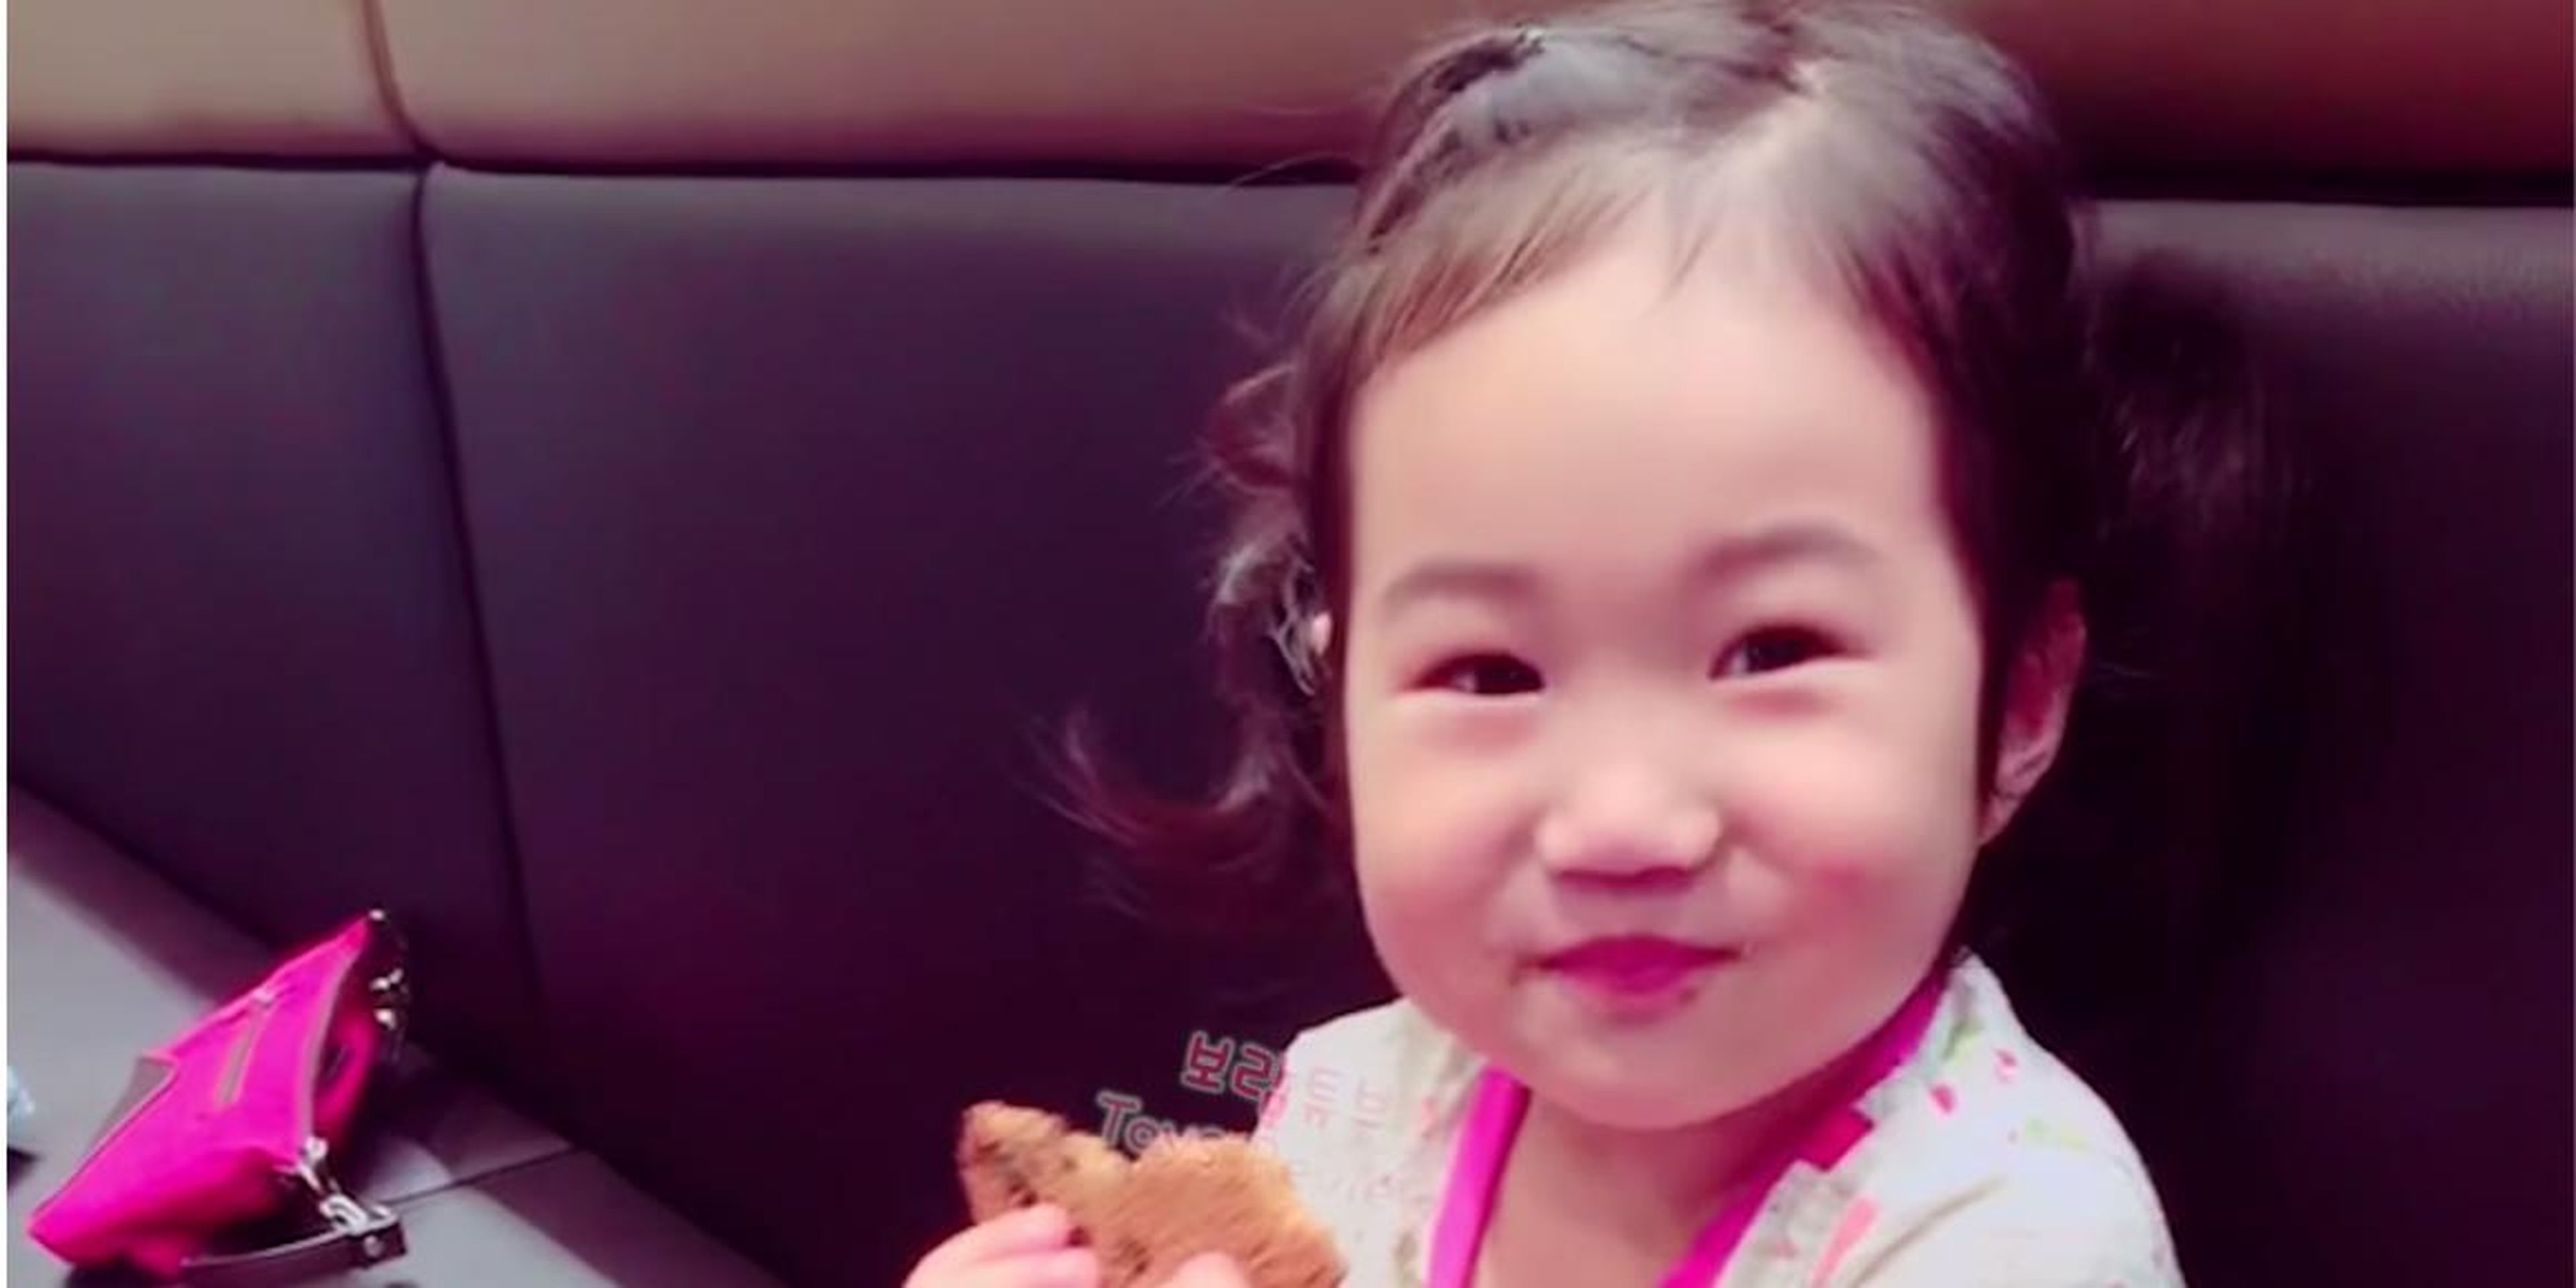 A 6-year-old YouTuber bought an $8 million home in South Korea